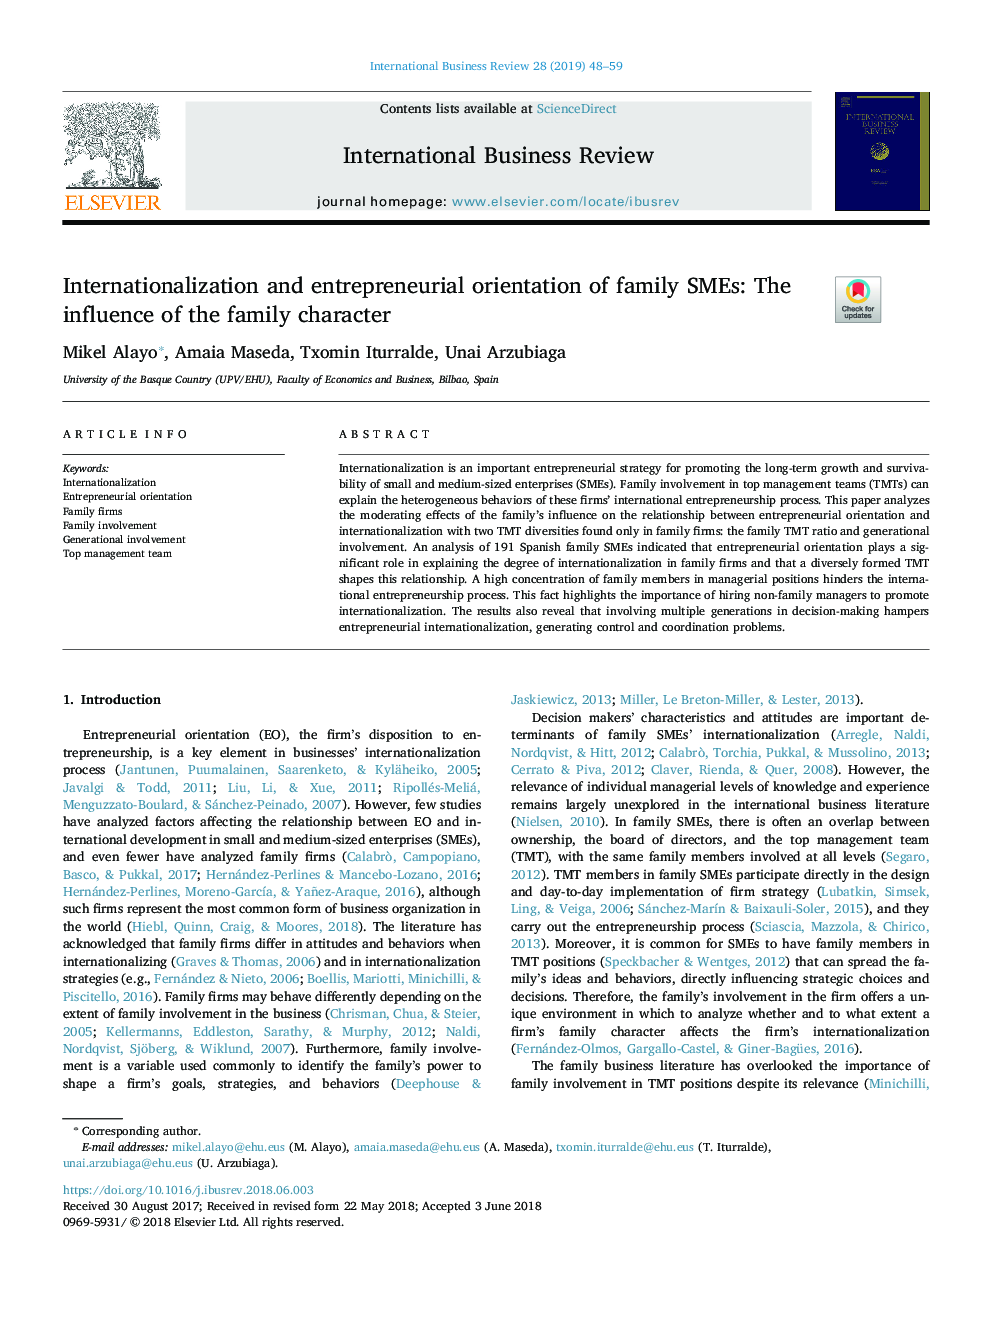 Internationalization and entrepreneurial orientation of family SMEs: The influence of the family character